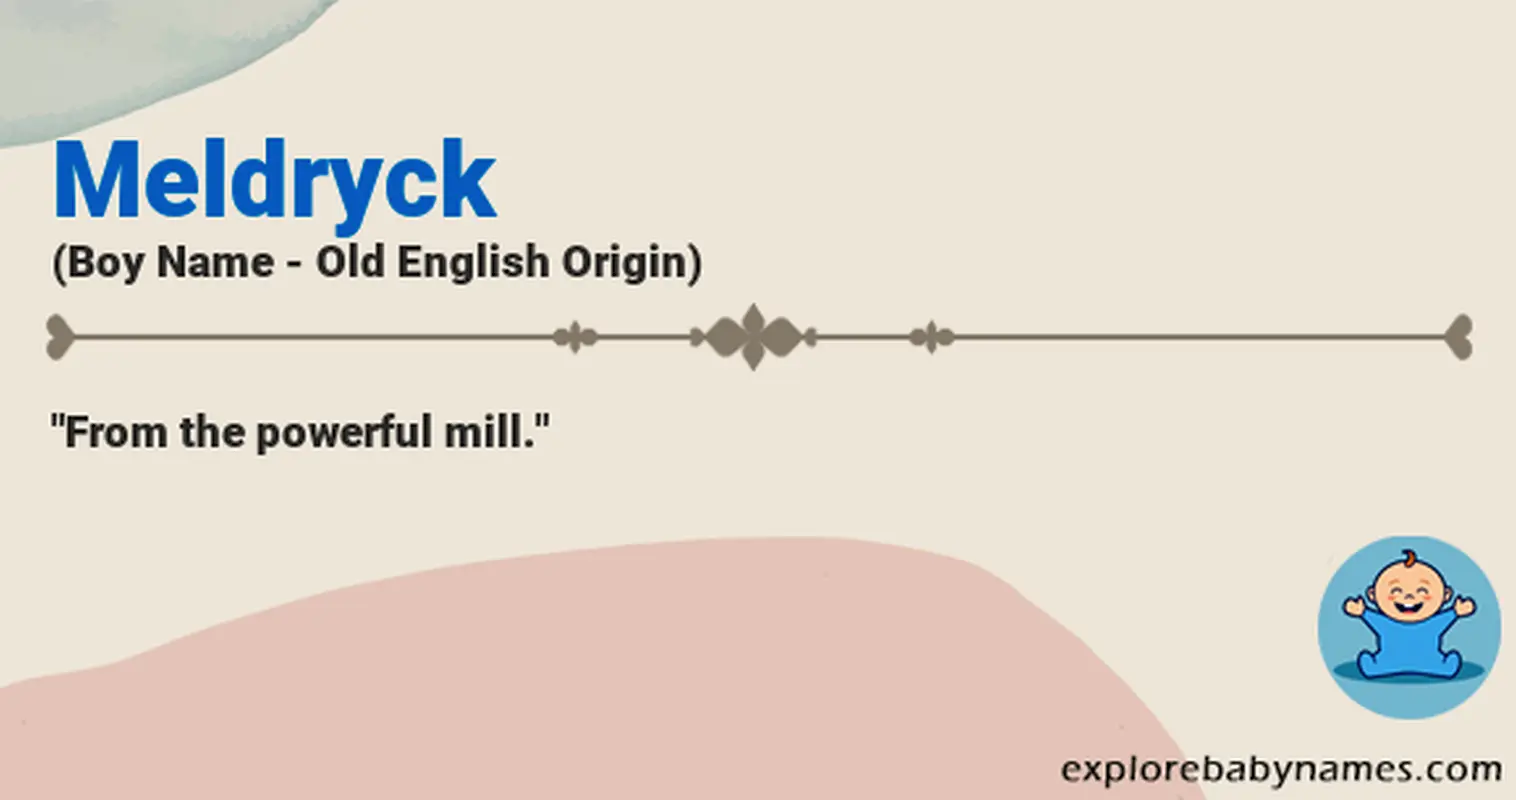 Meaning of Meldryck